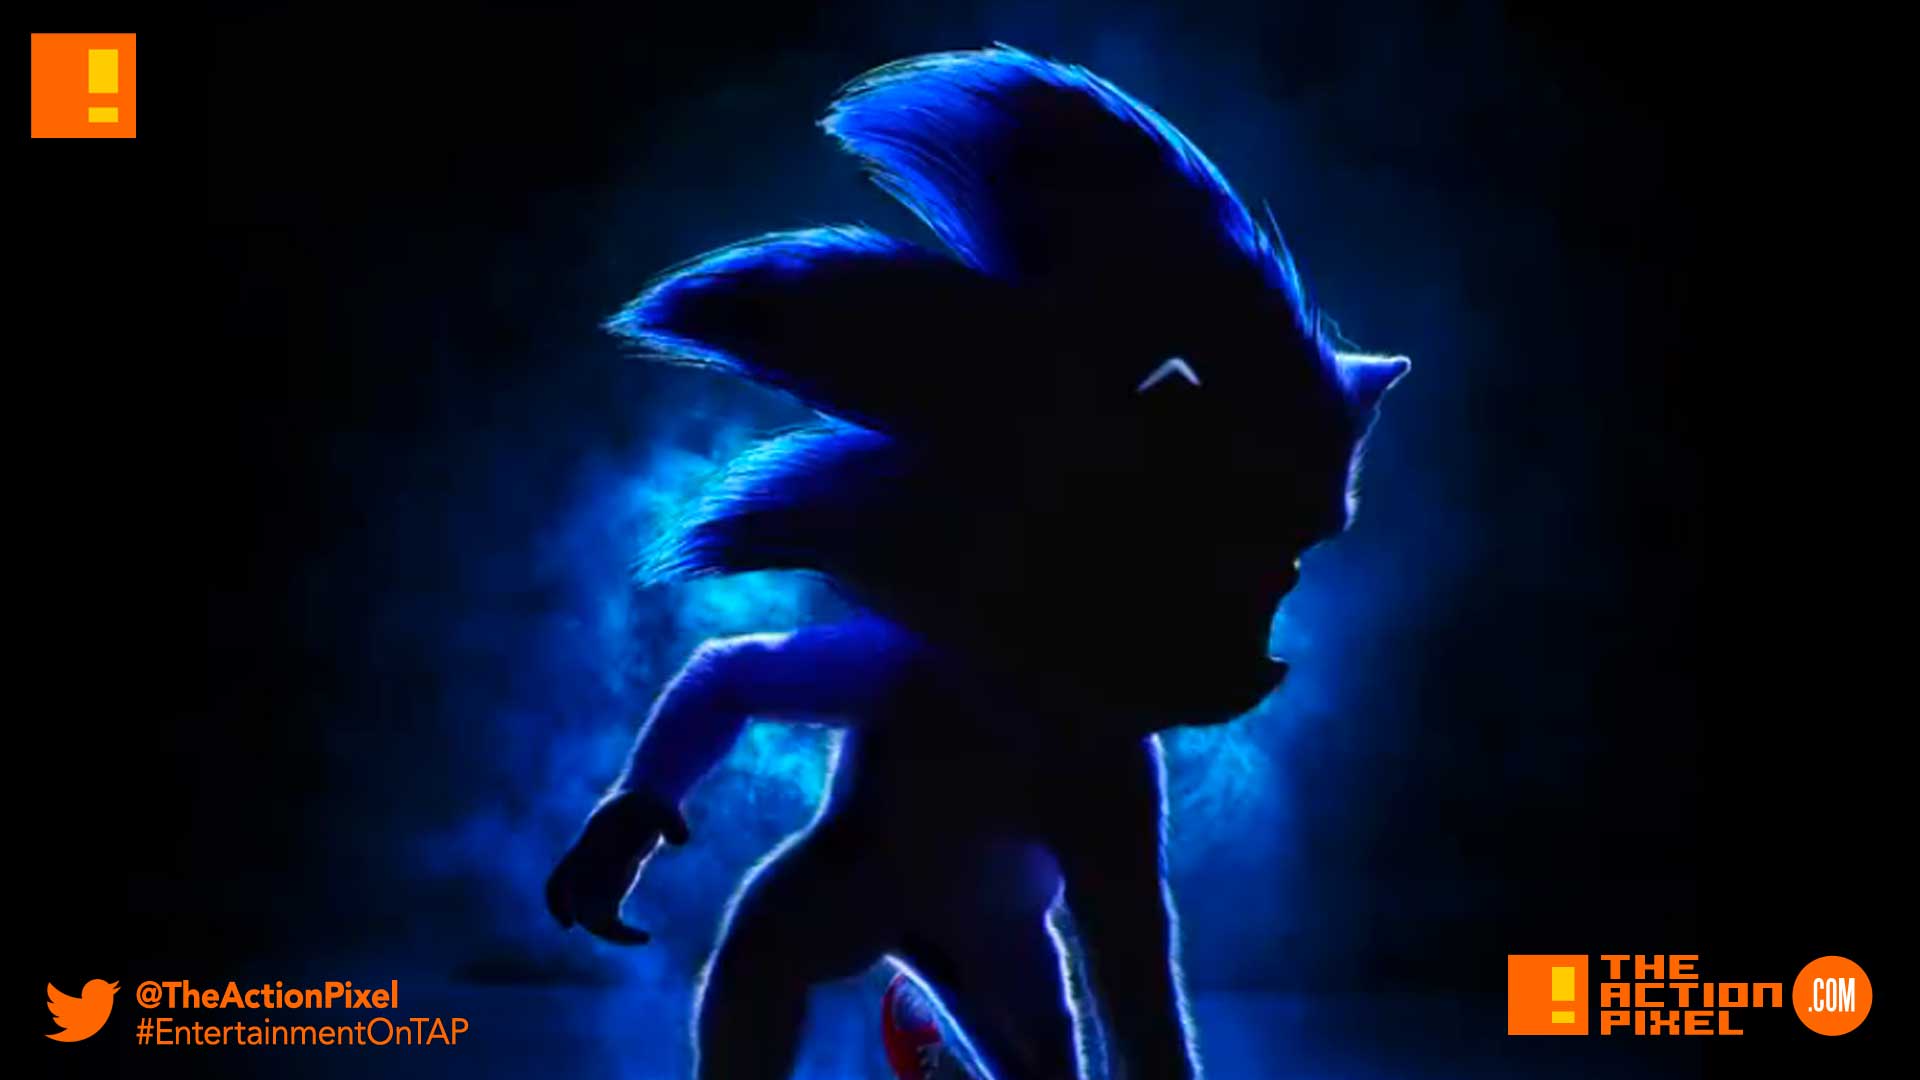 sonic the hedgehog, sonic, paramount pictures, the action pixel, entertainment on tap, poster,